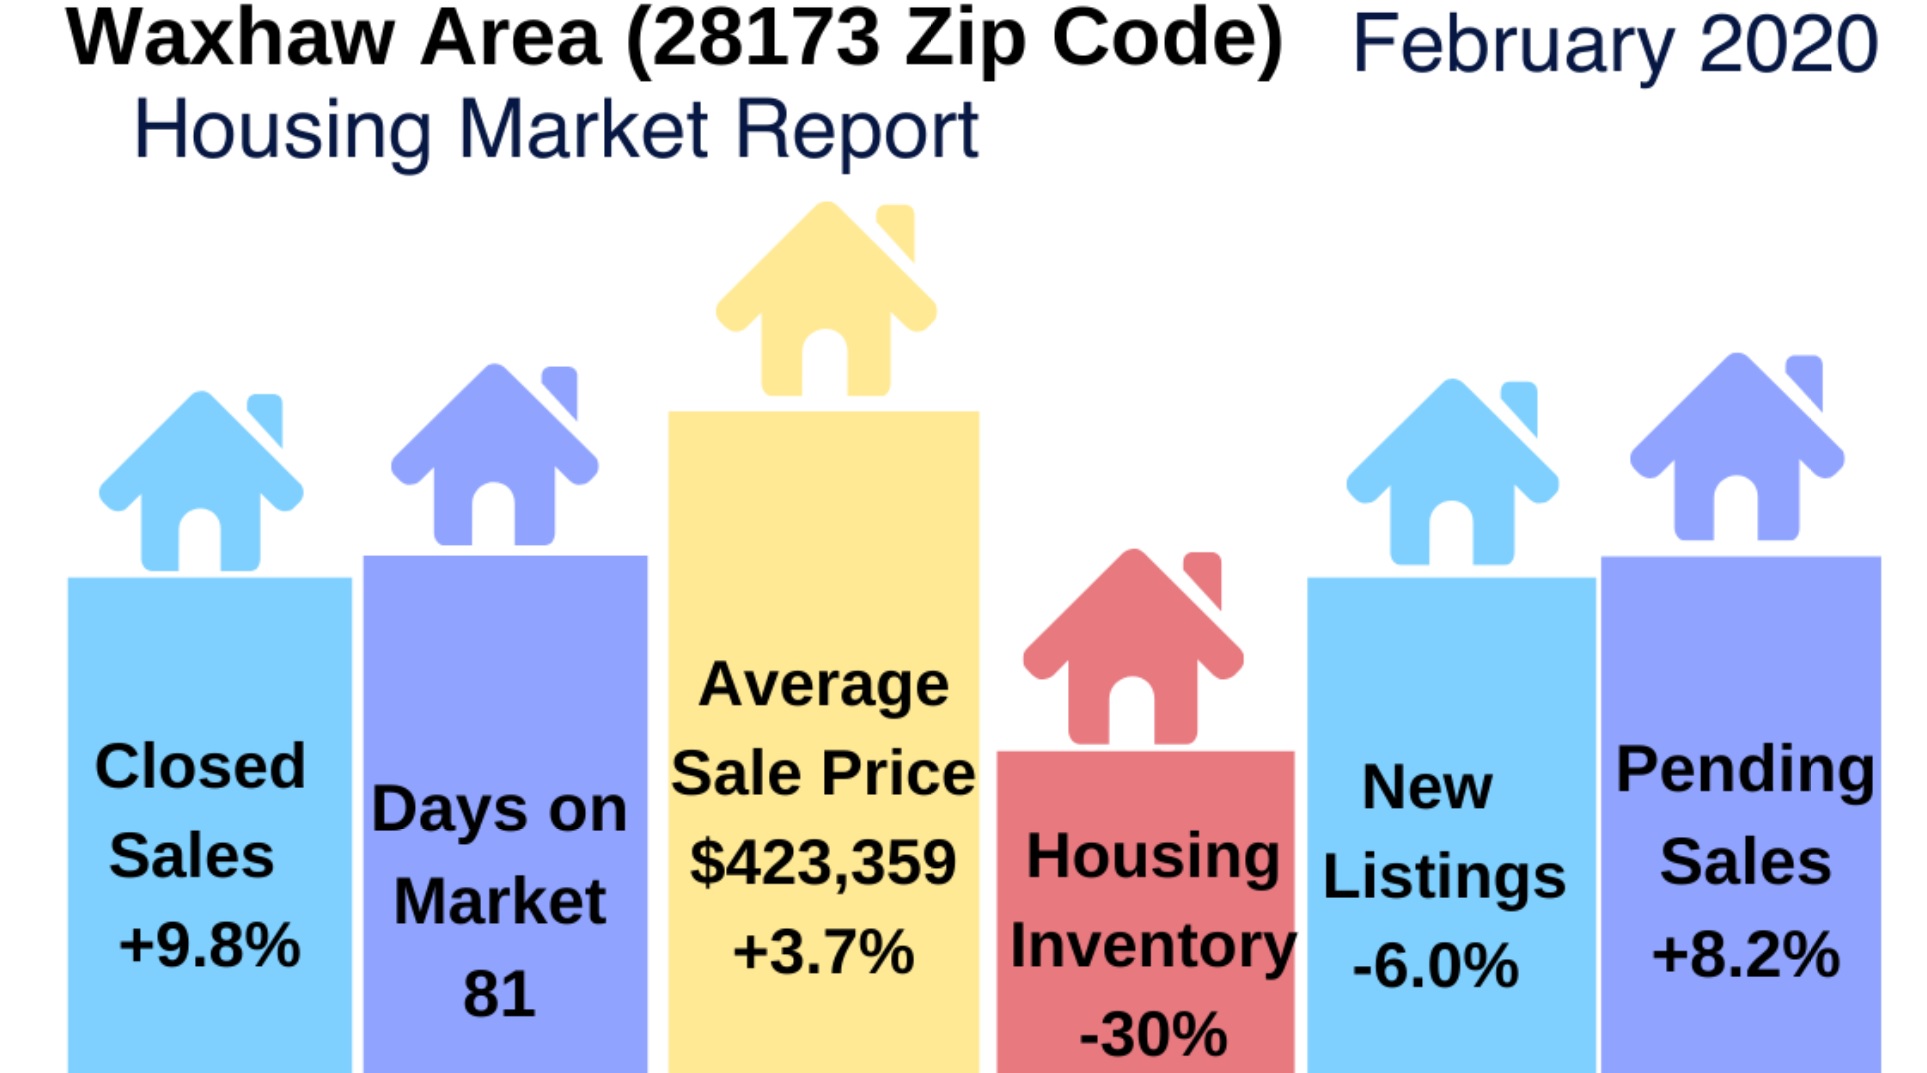 Waxhaw Area Real Estate Report: February 2020